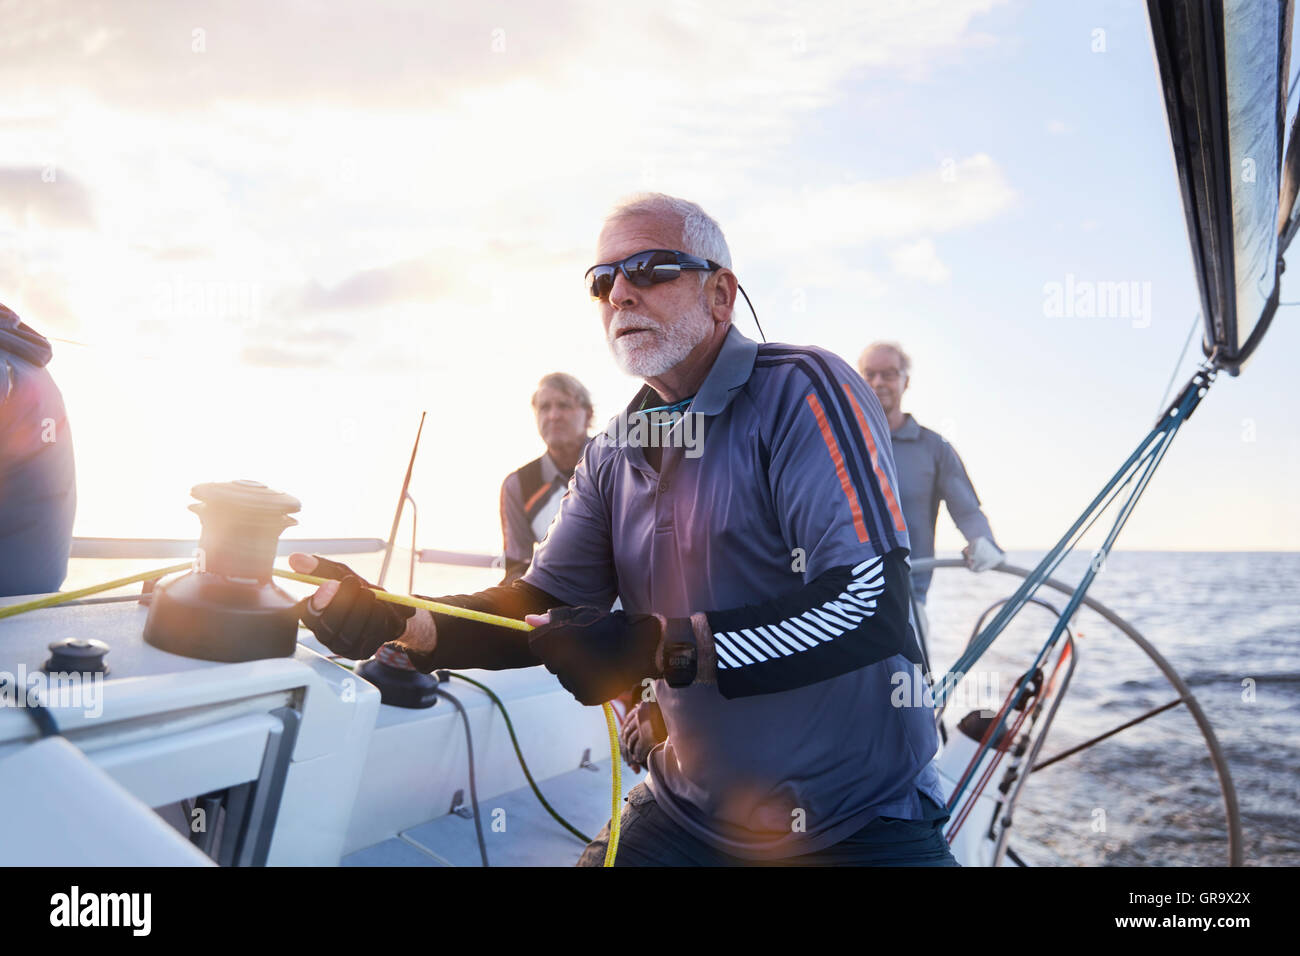 Retired man sailing holding rigging on sailboat Stock Photo